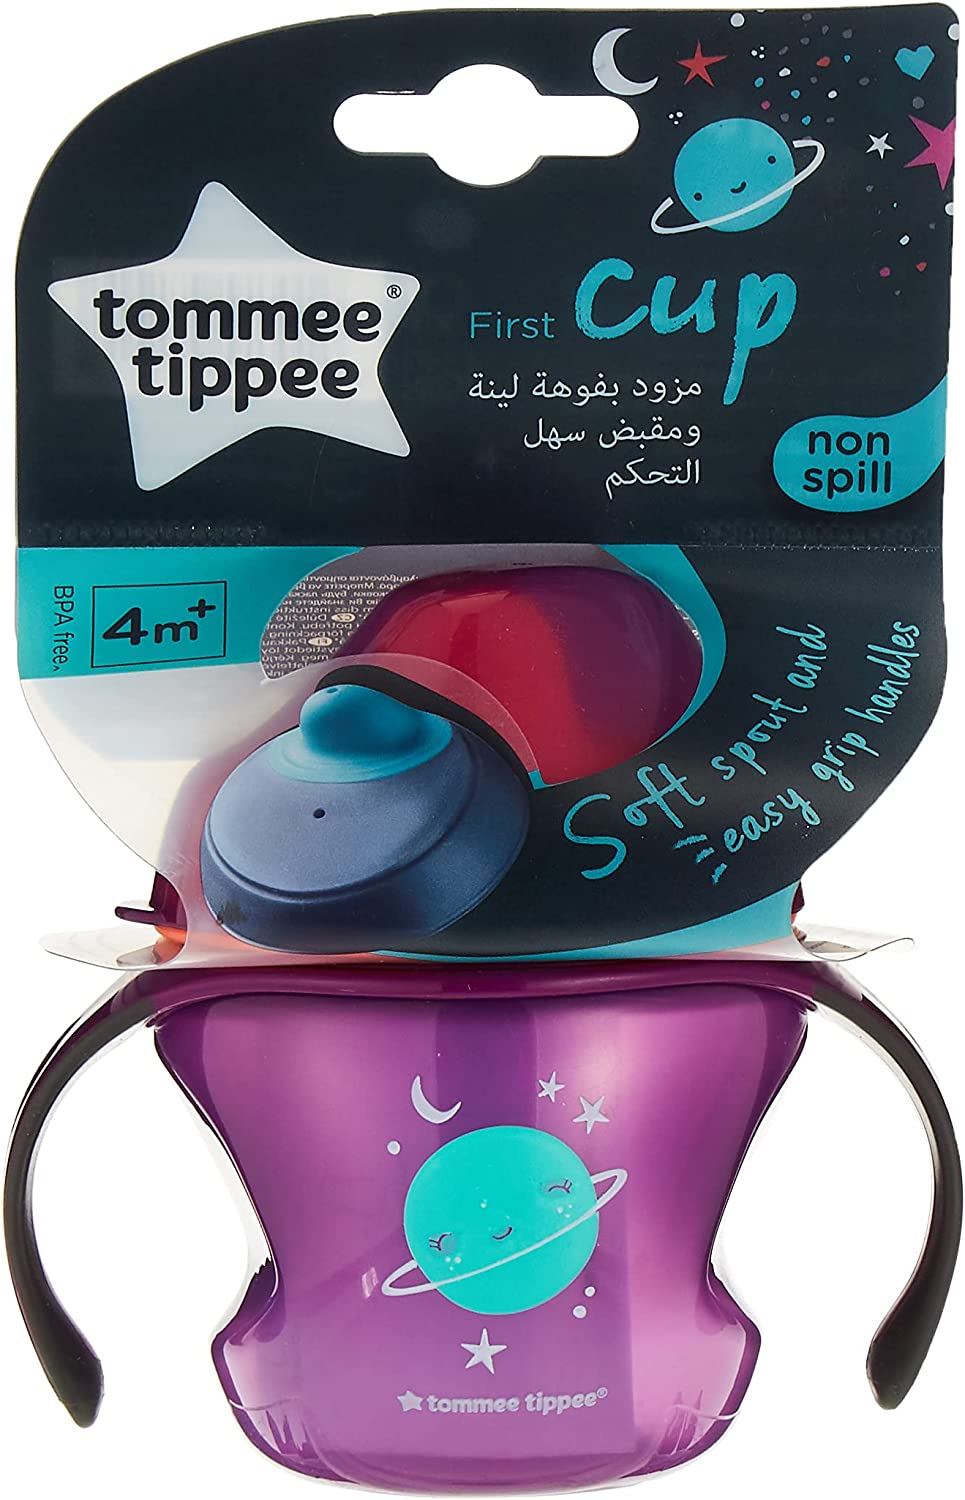 Tommee Tippee Weaning Baby's Sippee Cup Baby's Drinking Bottle|4m+|150ml